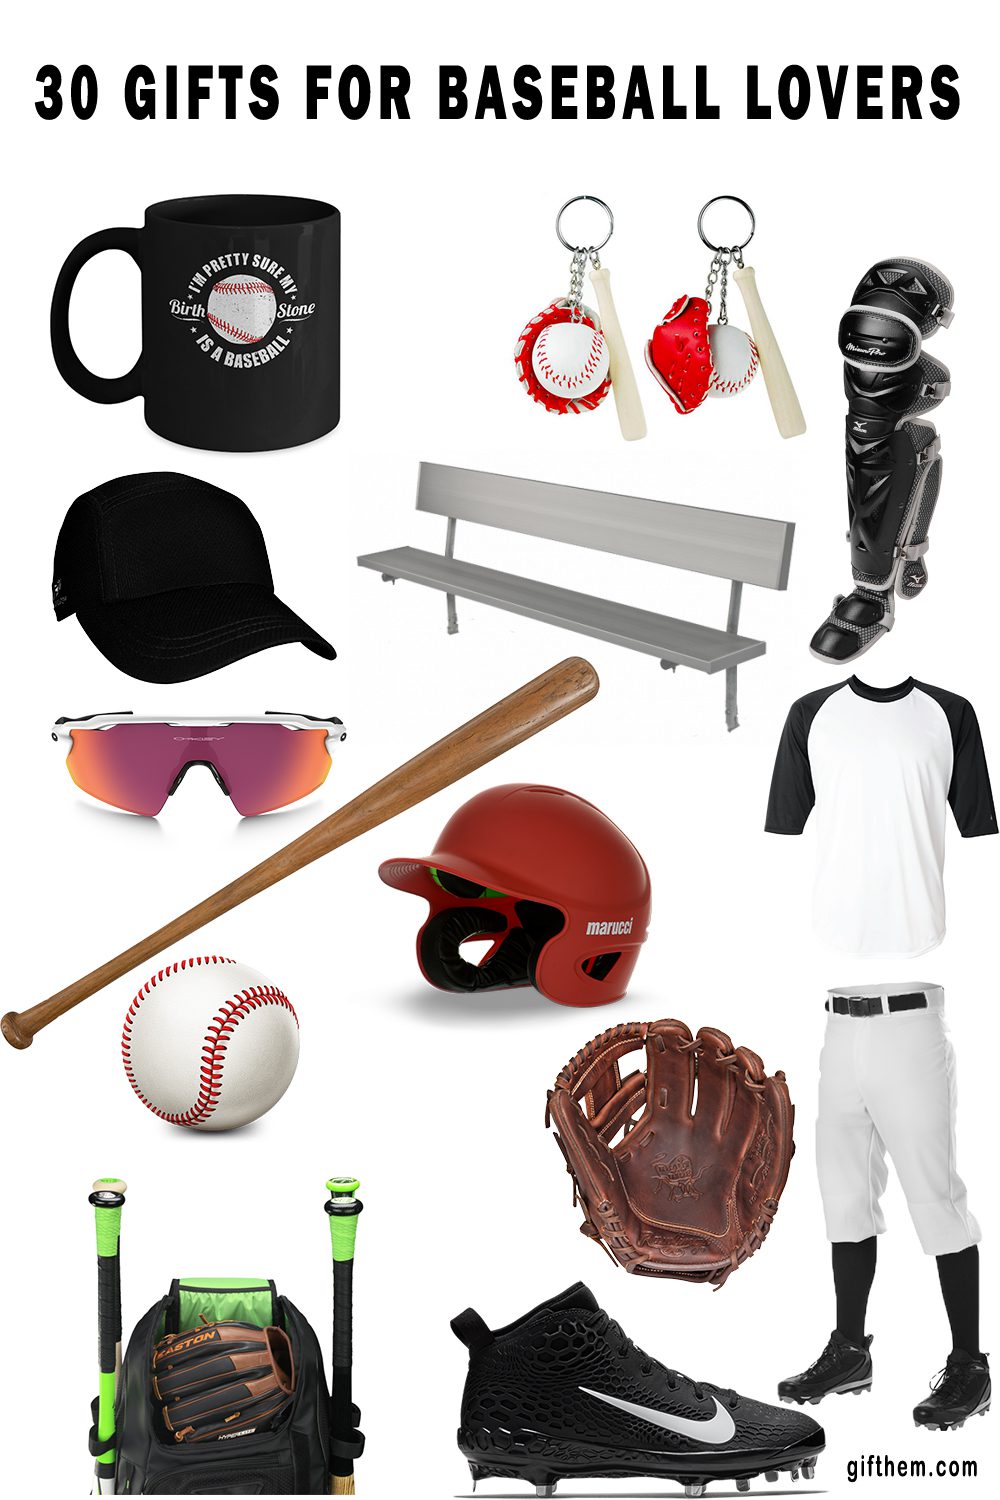 8 Best Gifts for Baseball Lovers & Fans in 8   Gifthem